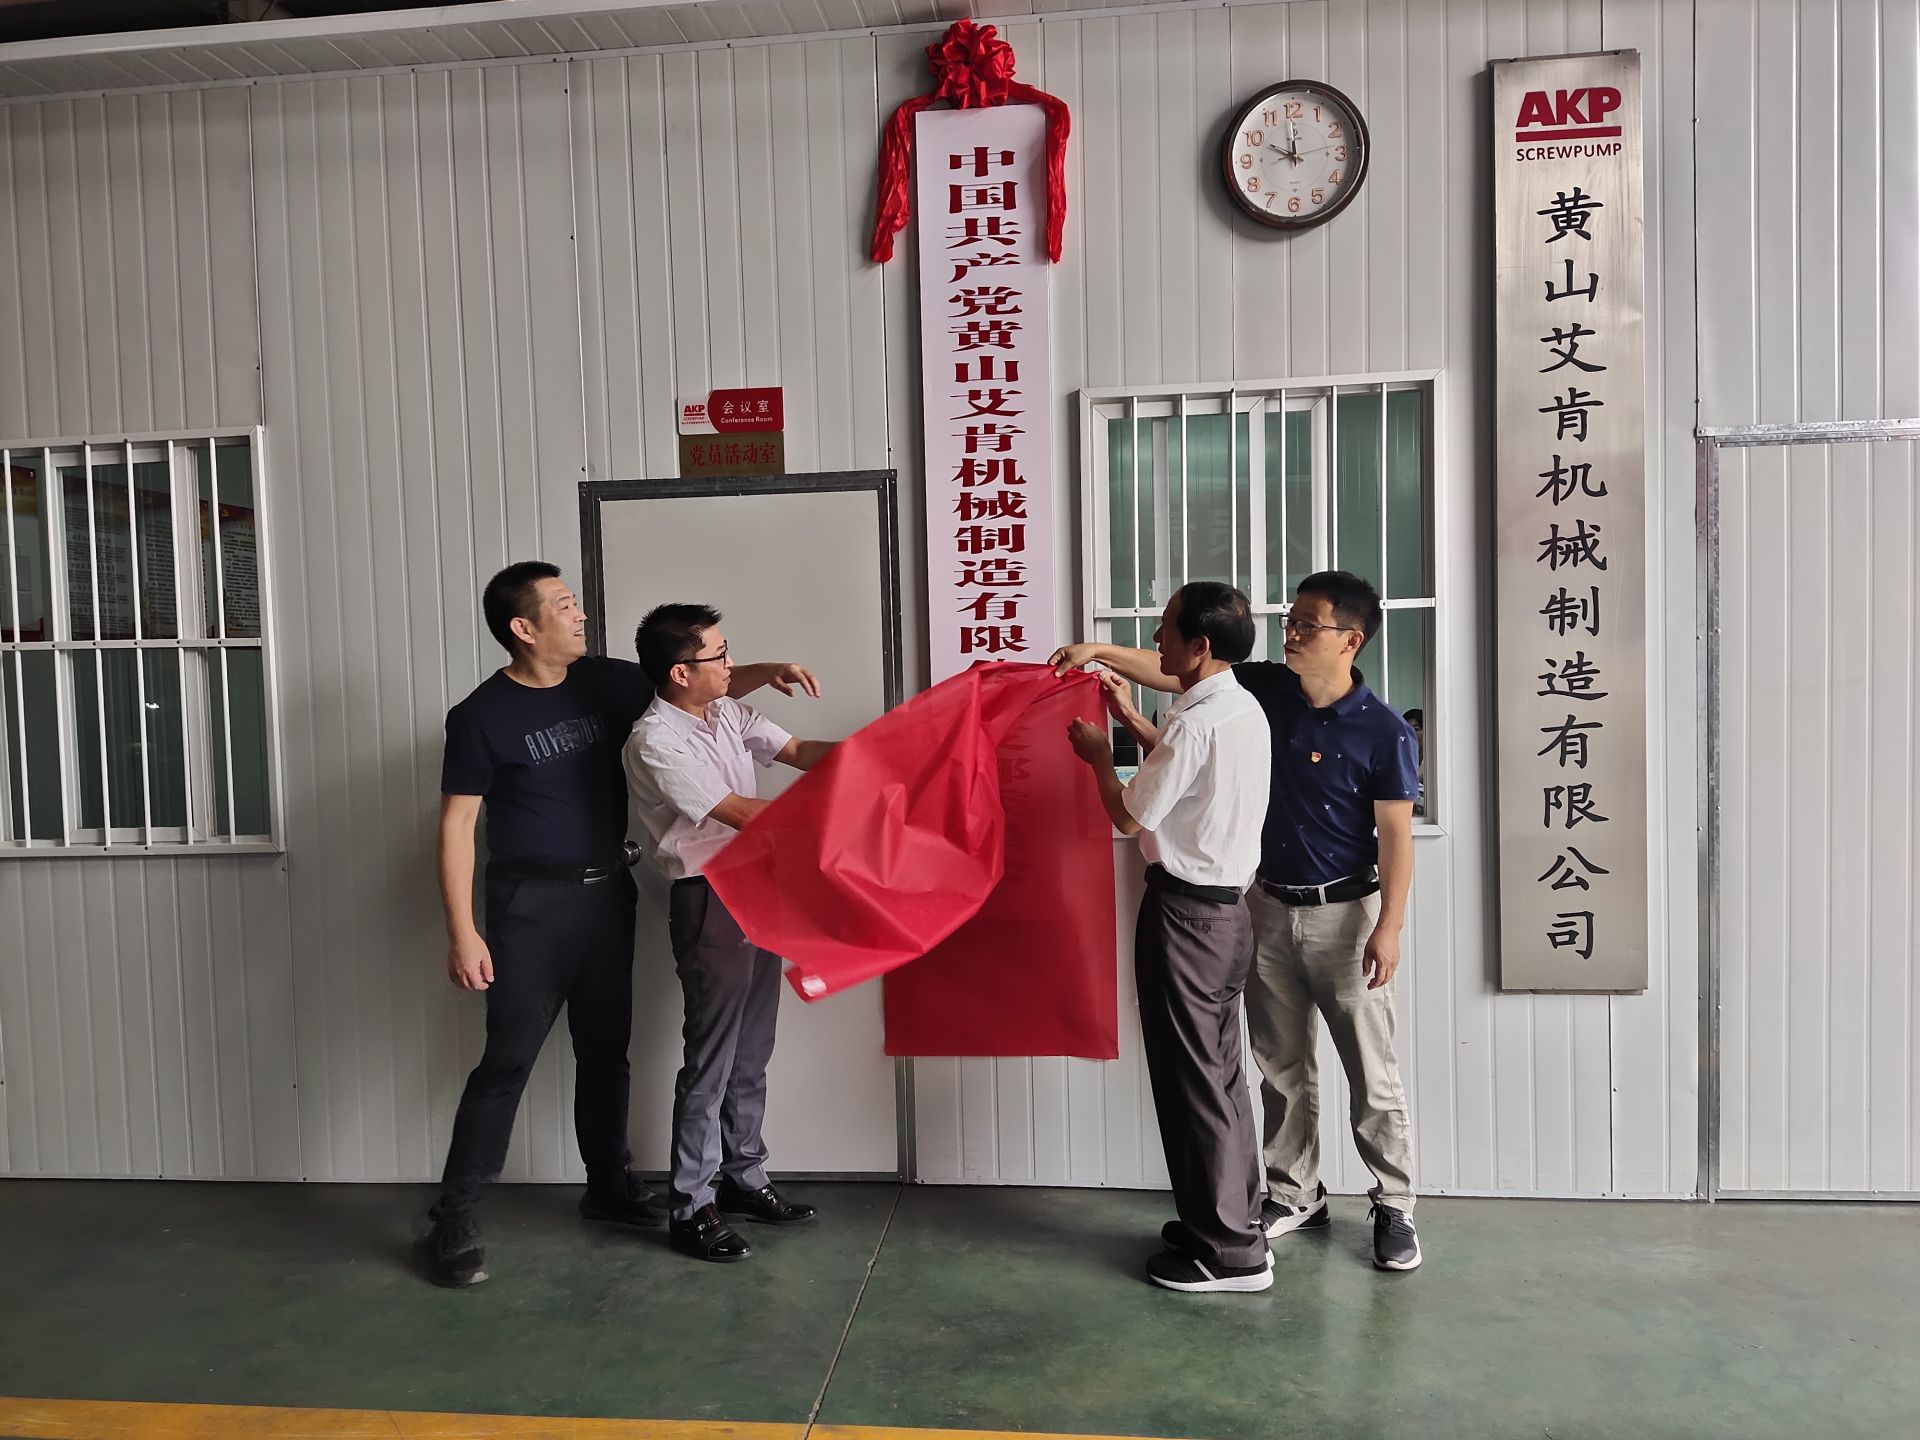 The branch committee of Huangshan Aiken Machinery Manufacturing Co., Ltd. of the Communist Party of China was unveiled